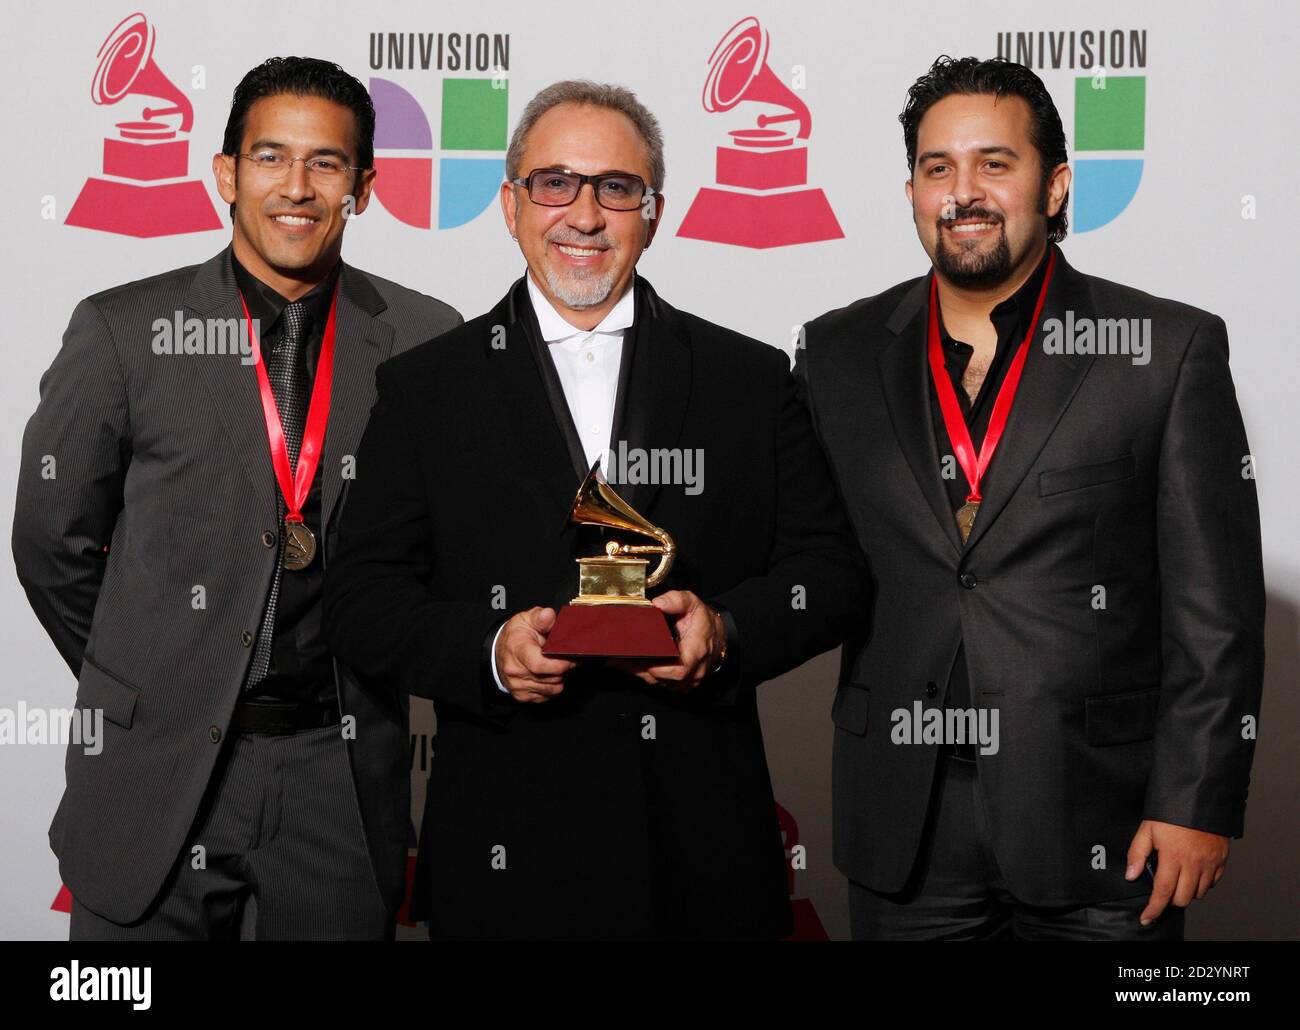 Emilio Estefan, husband of singer Gloria Estefan, poses with his award won  for Best Traditional Tropical Album for "90 Millas", and two guests at the  9th annual Latin Grammy Awards in Houston,